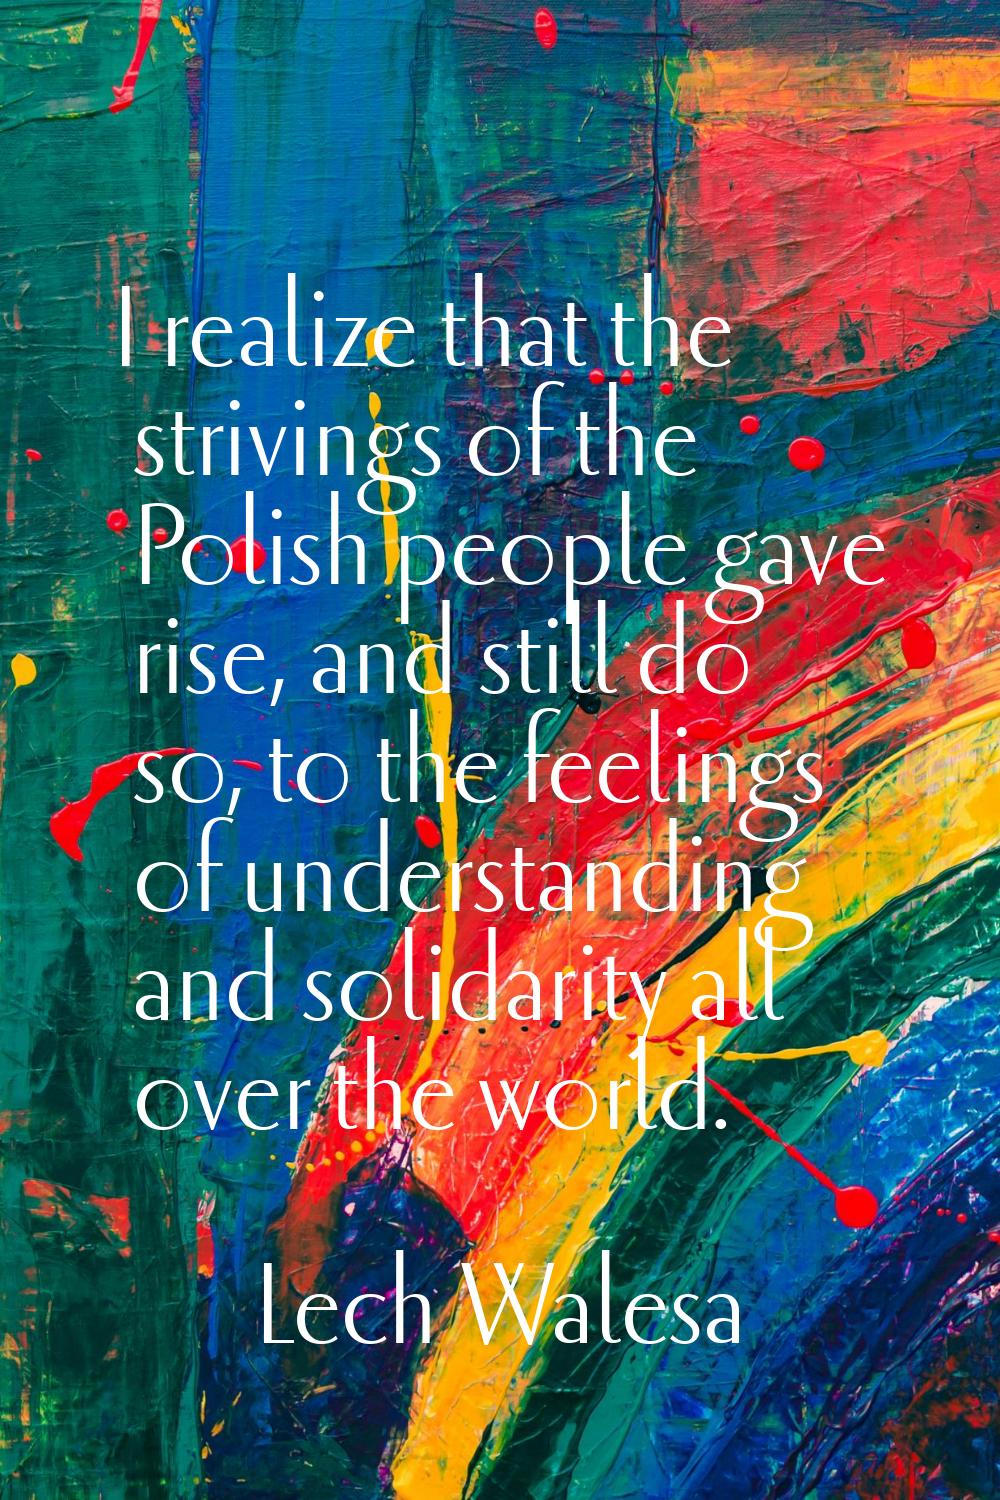 I realize that the strivings of the Polish people gave rise, and still do so, to the feelings of un